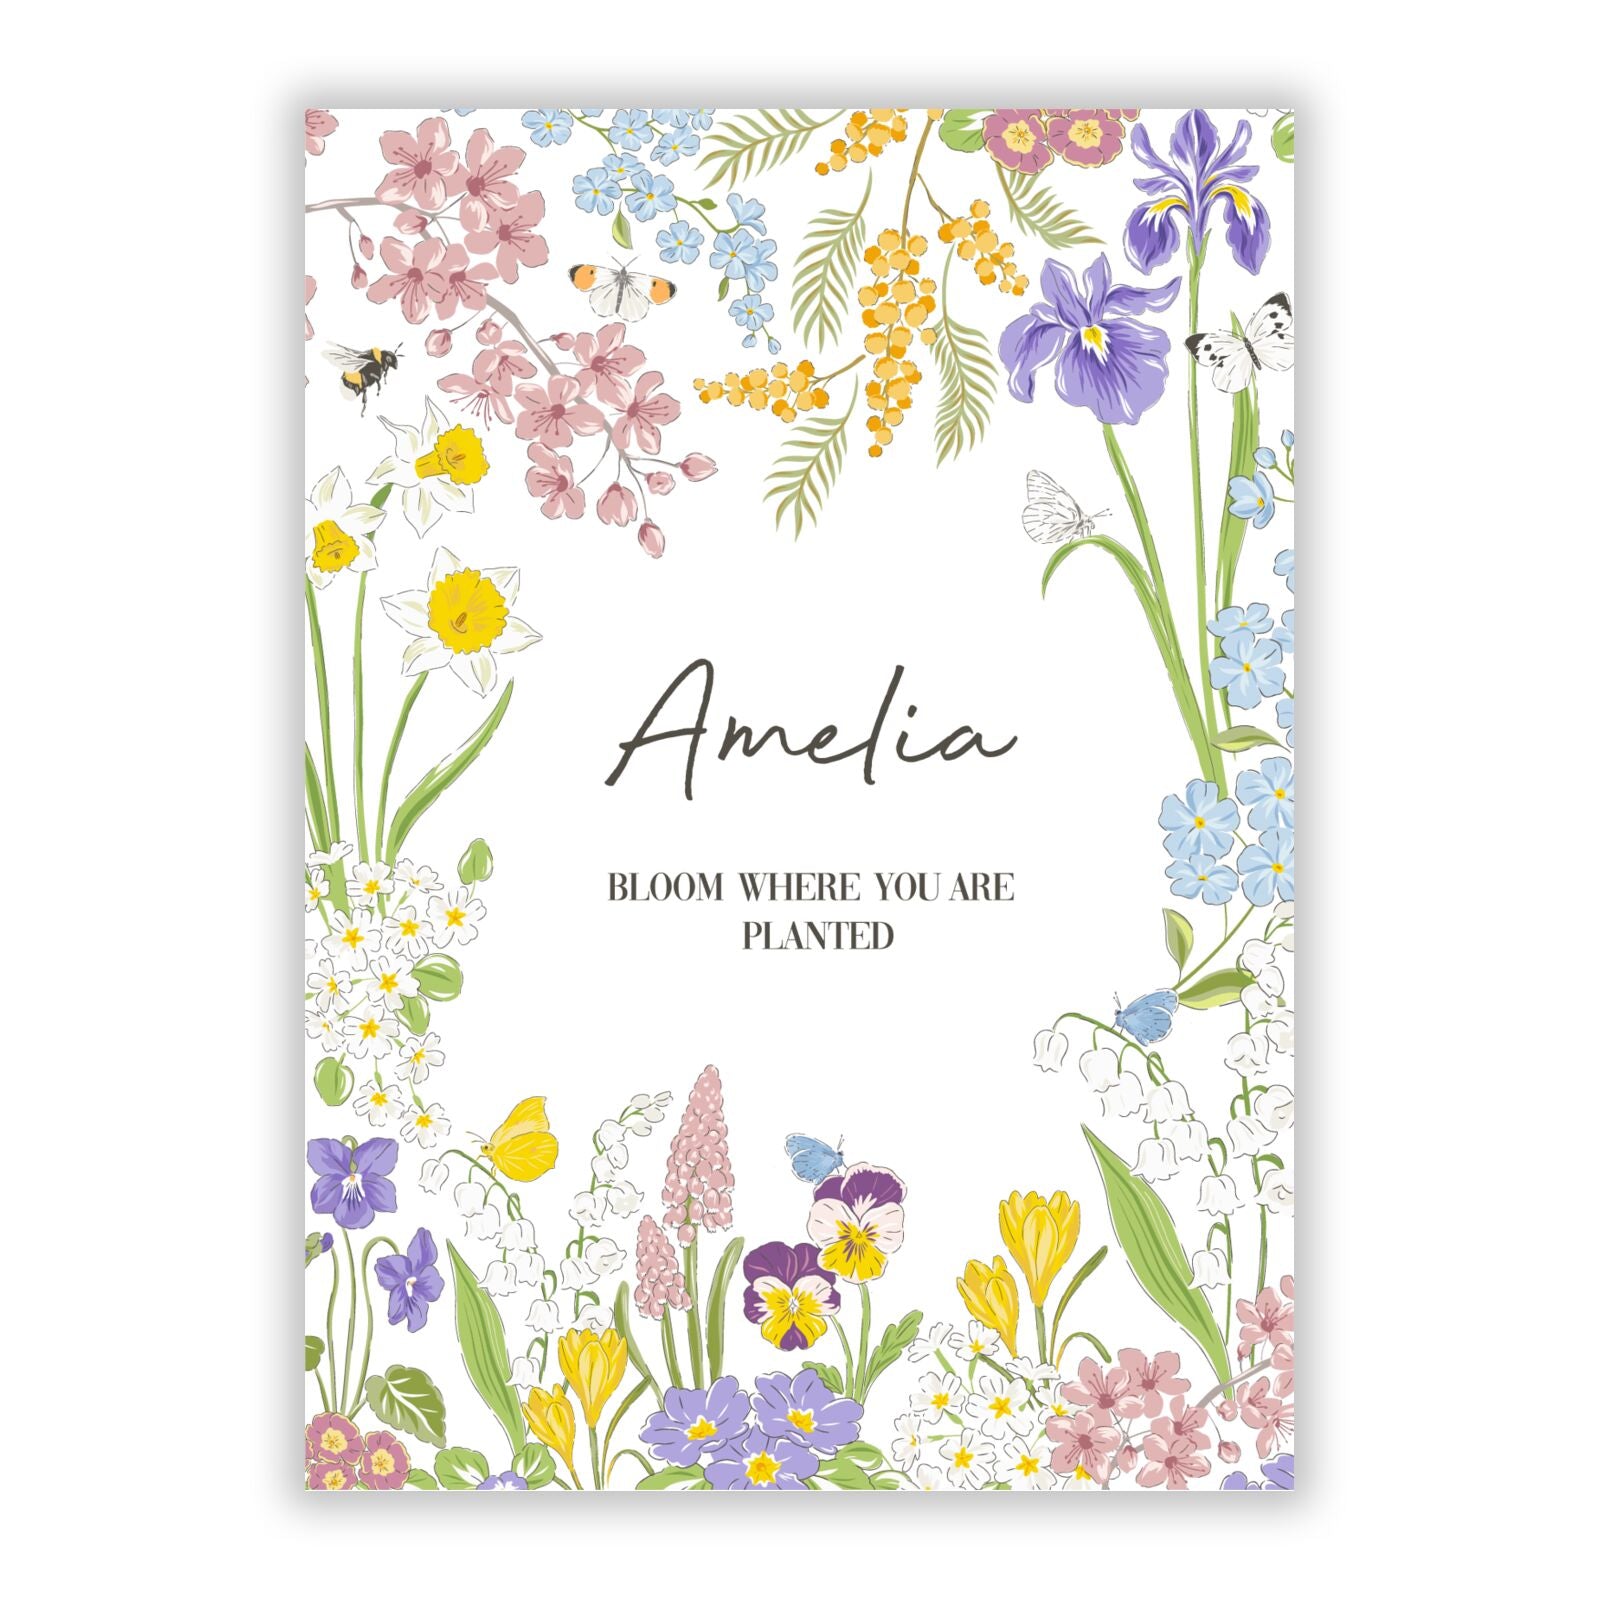 Bloom Where You Are Planted A5 Flat Greetings Card